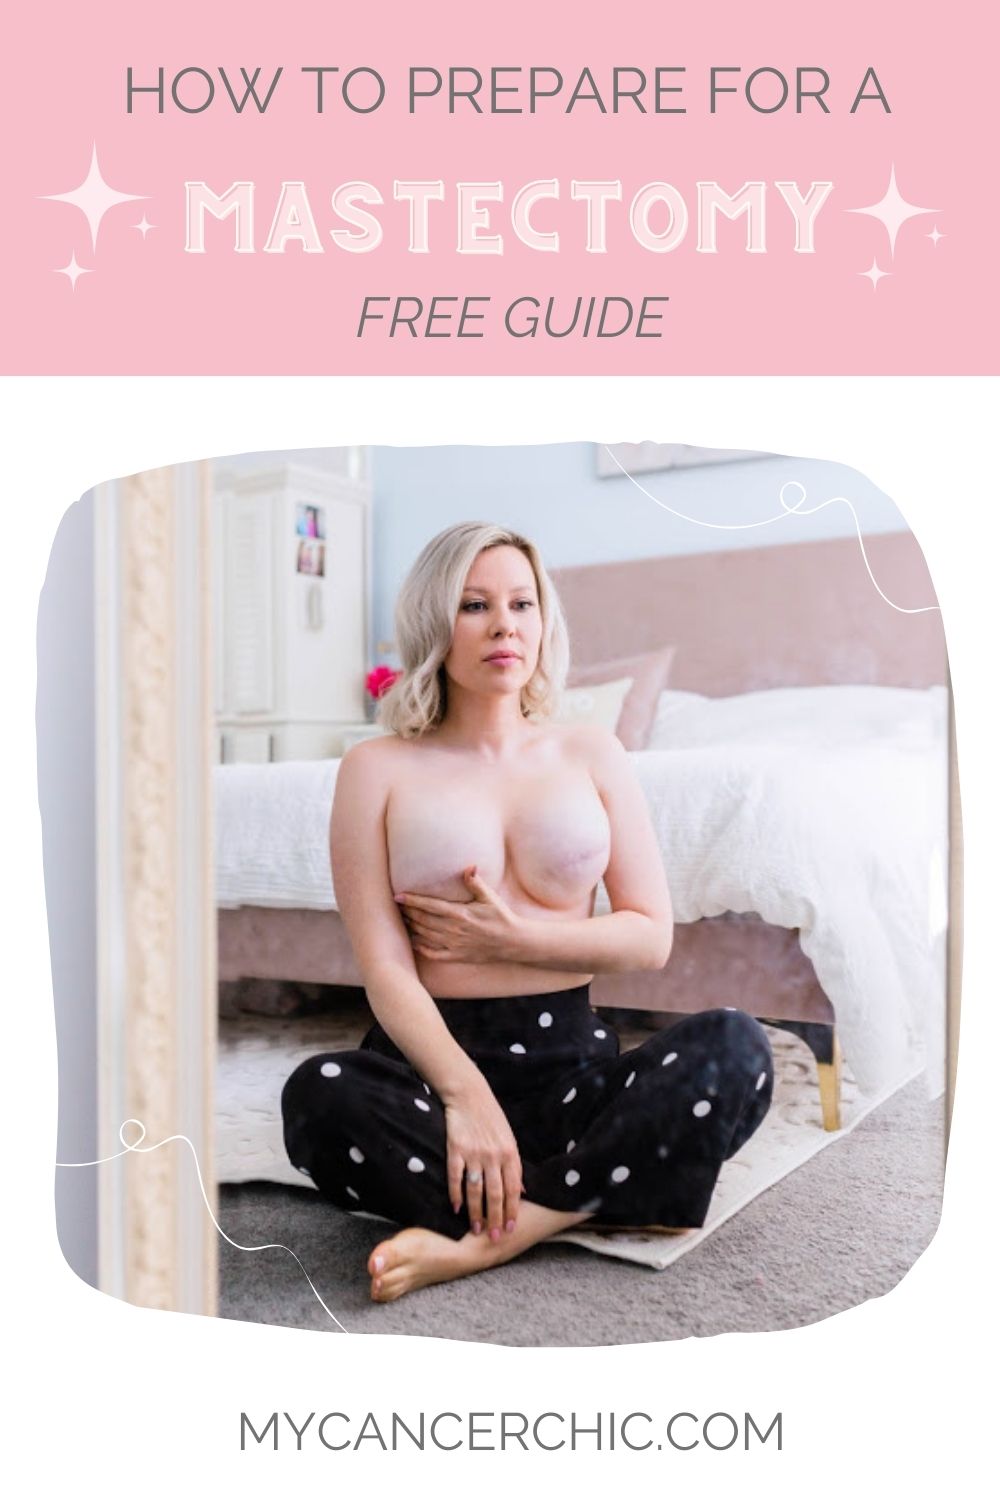 HOW TO PREPARE FOR MASTECTOMY GUIDE